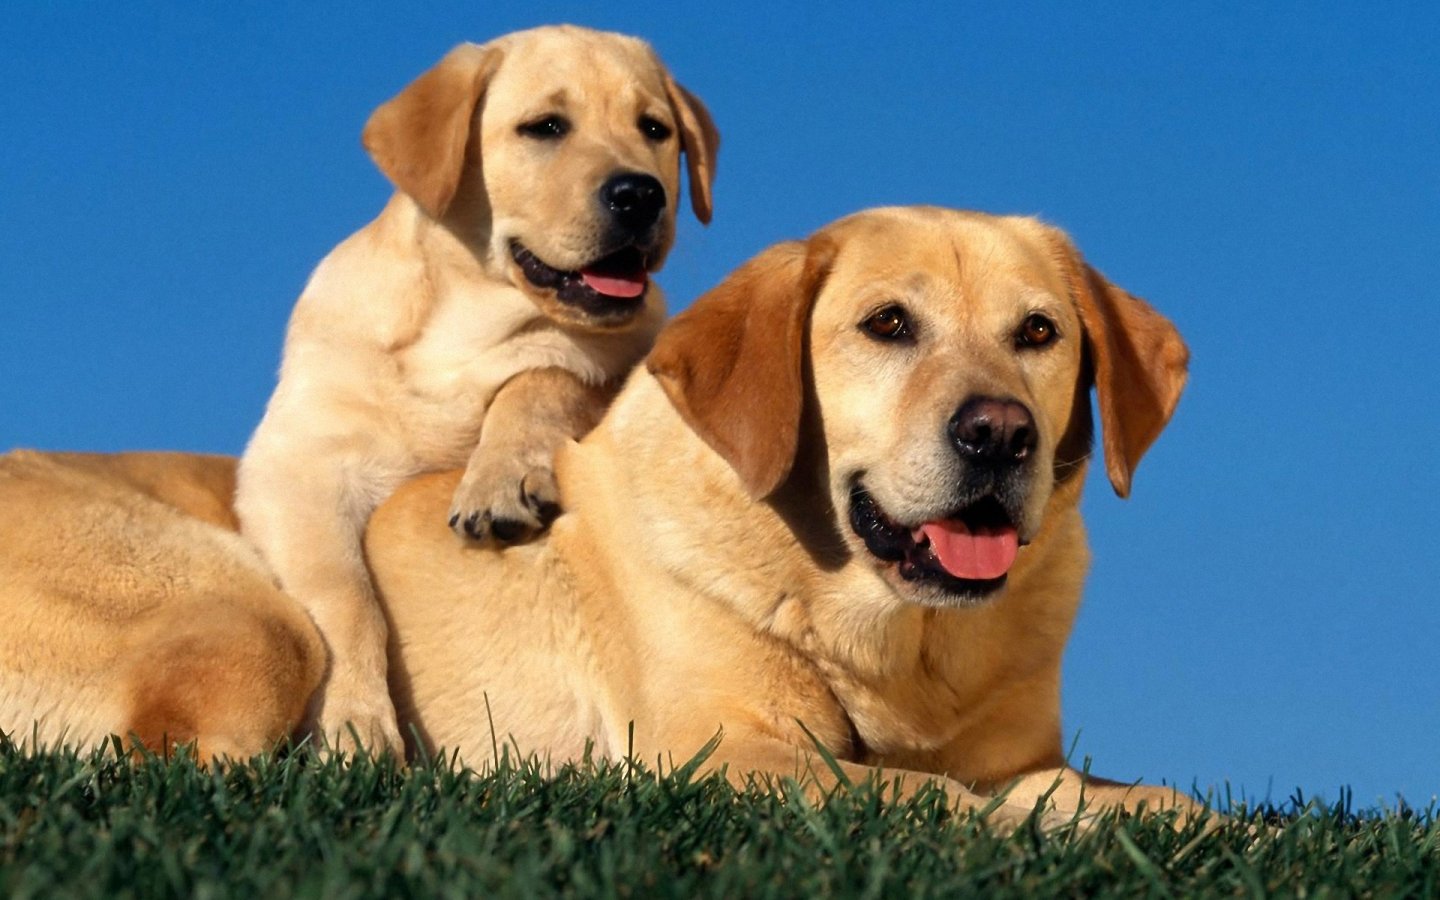 Dog Wallpapers Free Download - Dog And Puppy Images Hd - HD Wallpaper 